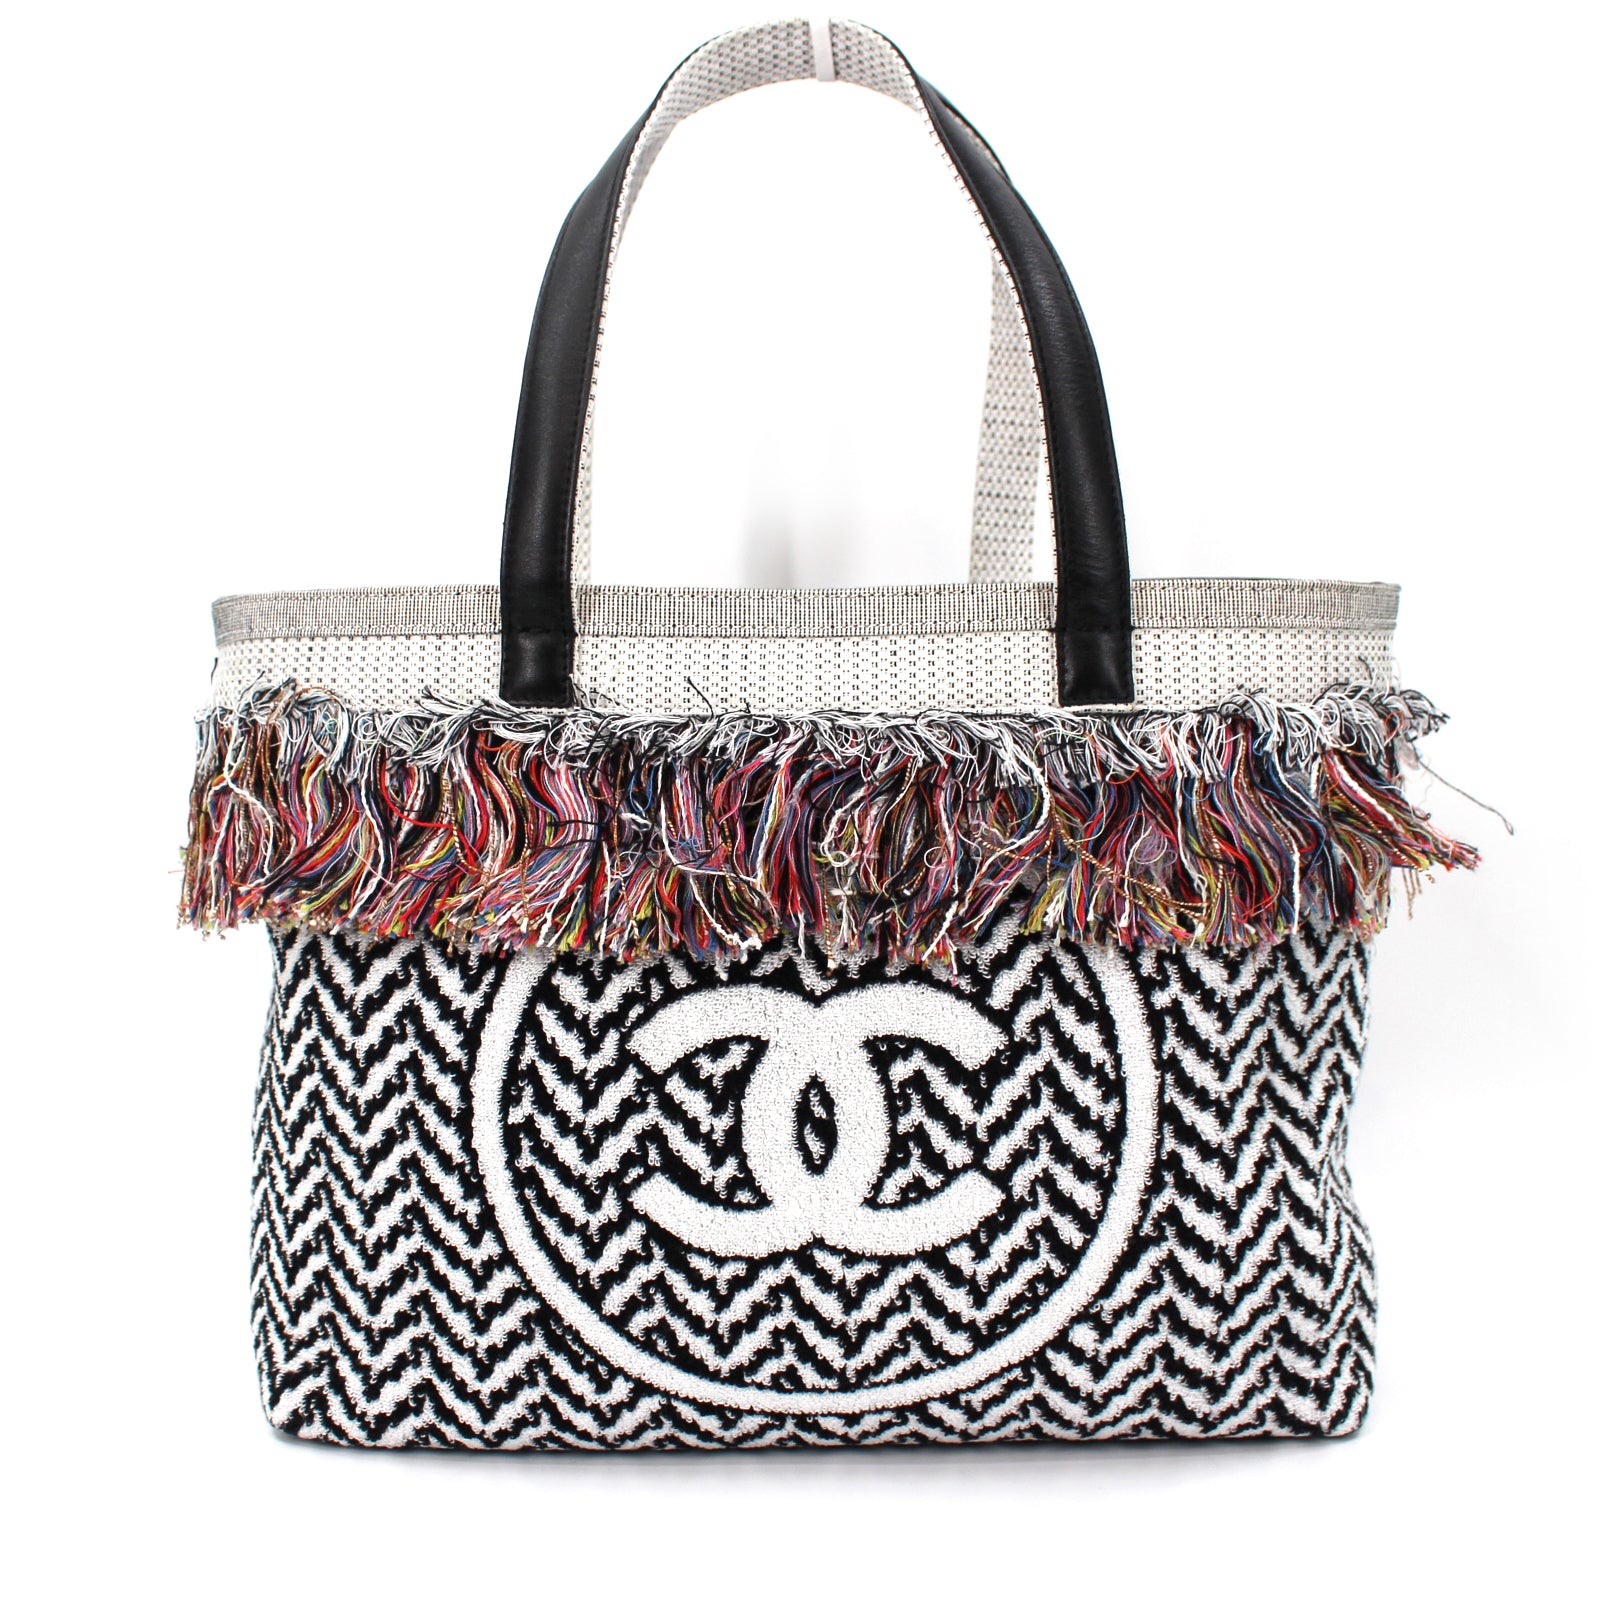 Chanel Fringe Beach Tote with Towel